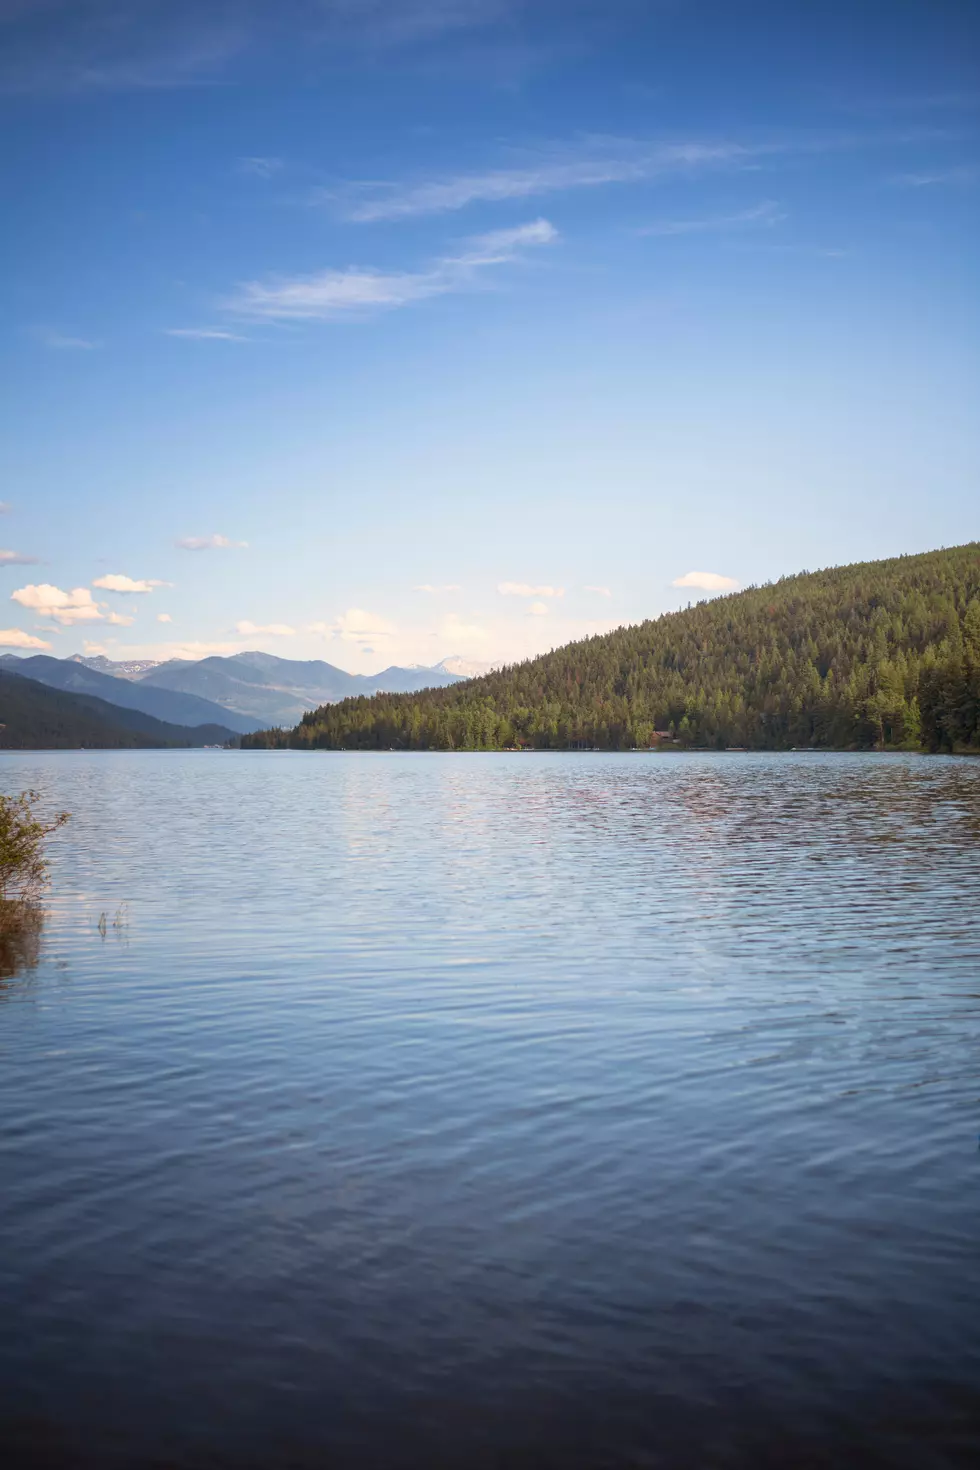 Don’t Miss Out On These 4 Summer Fun-Filled Activities In Montana